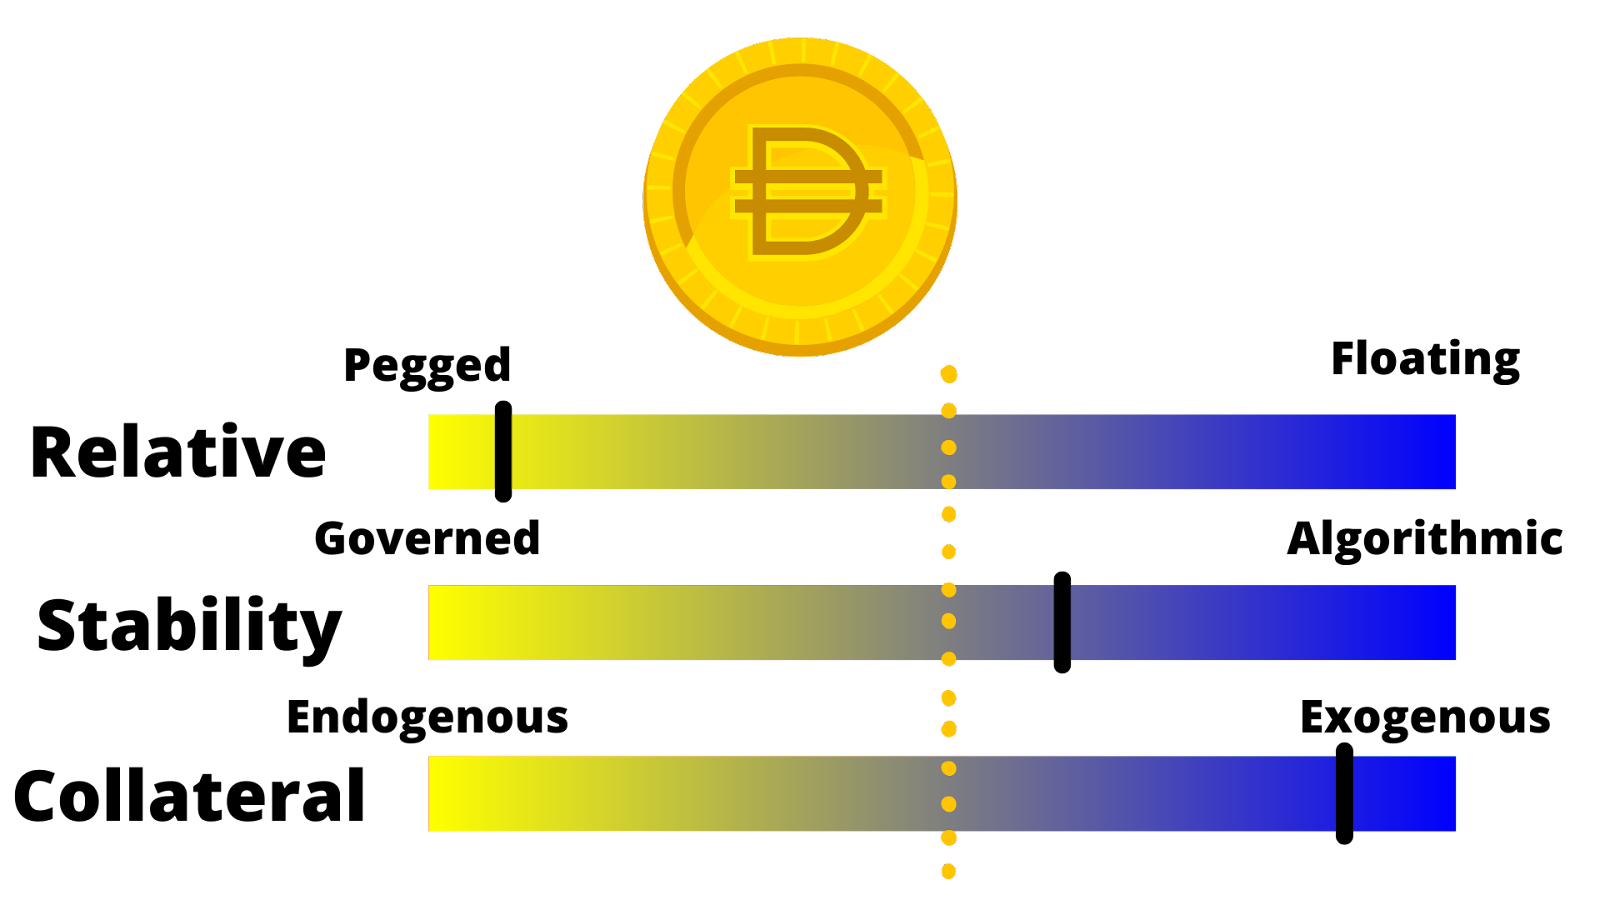 Diagram of DAI stablecoin categorization.